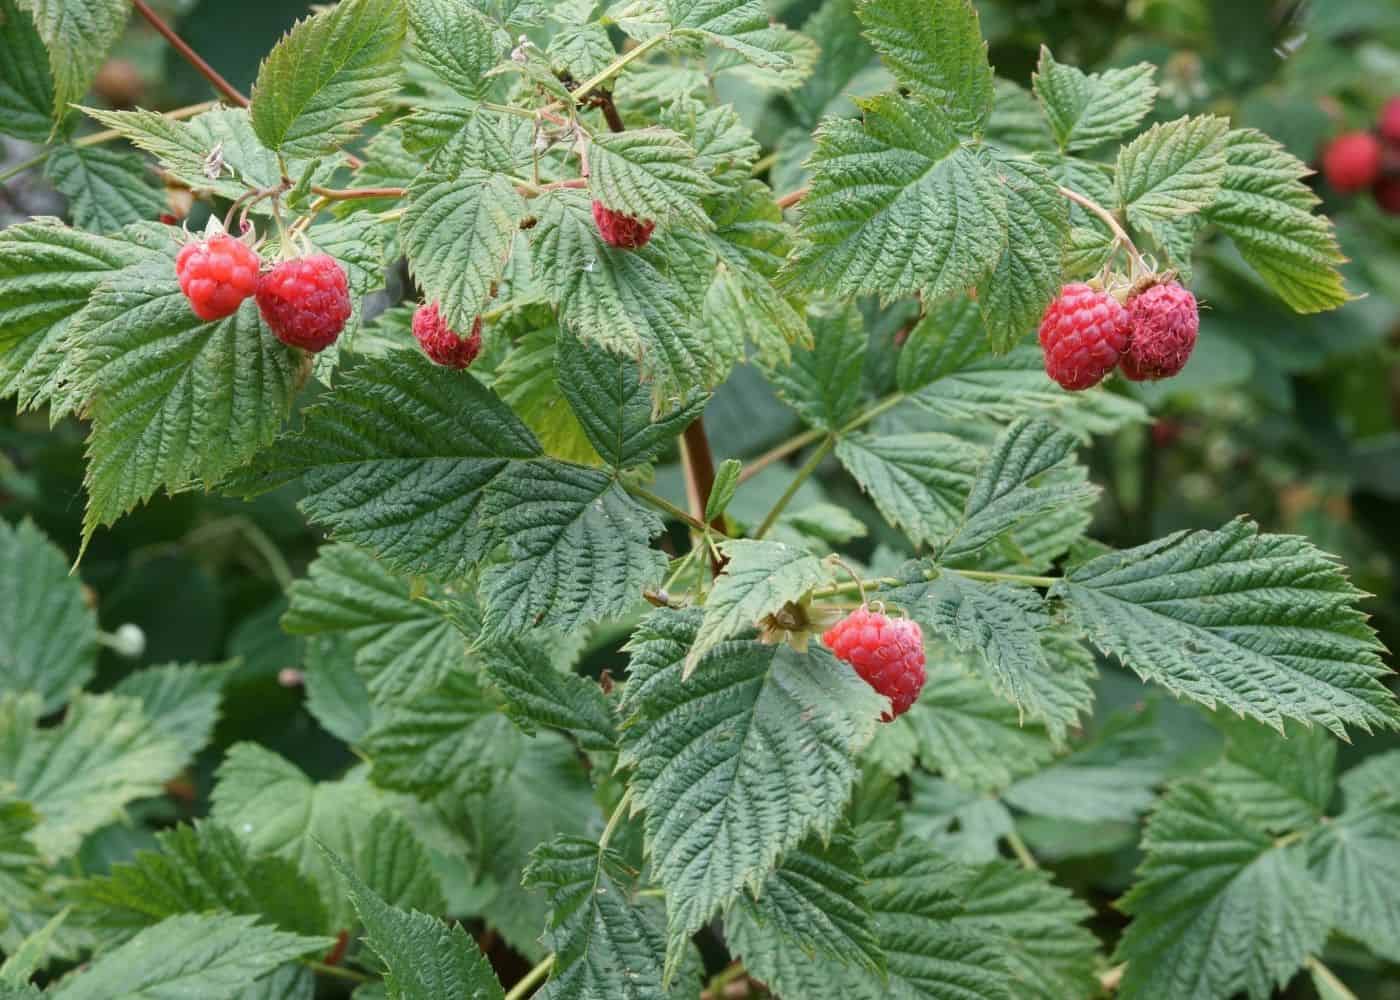 Companion plants for raspberries - avoid these crops